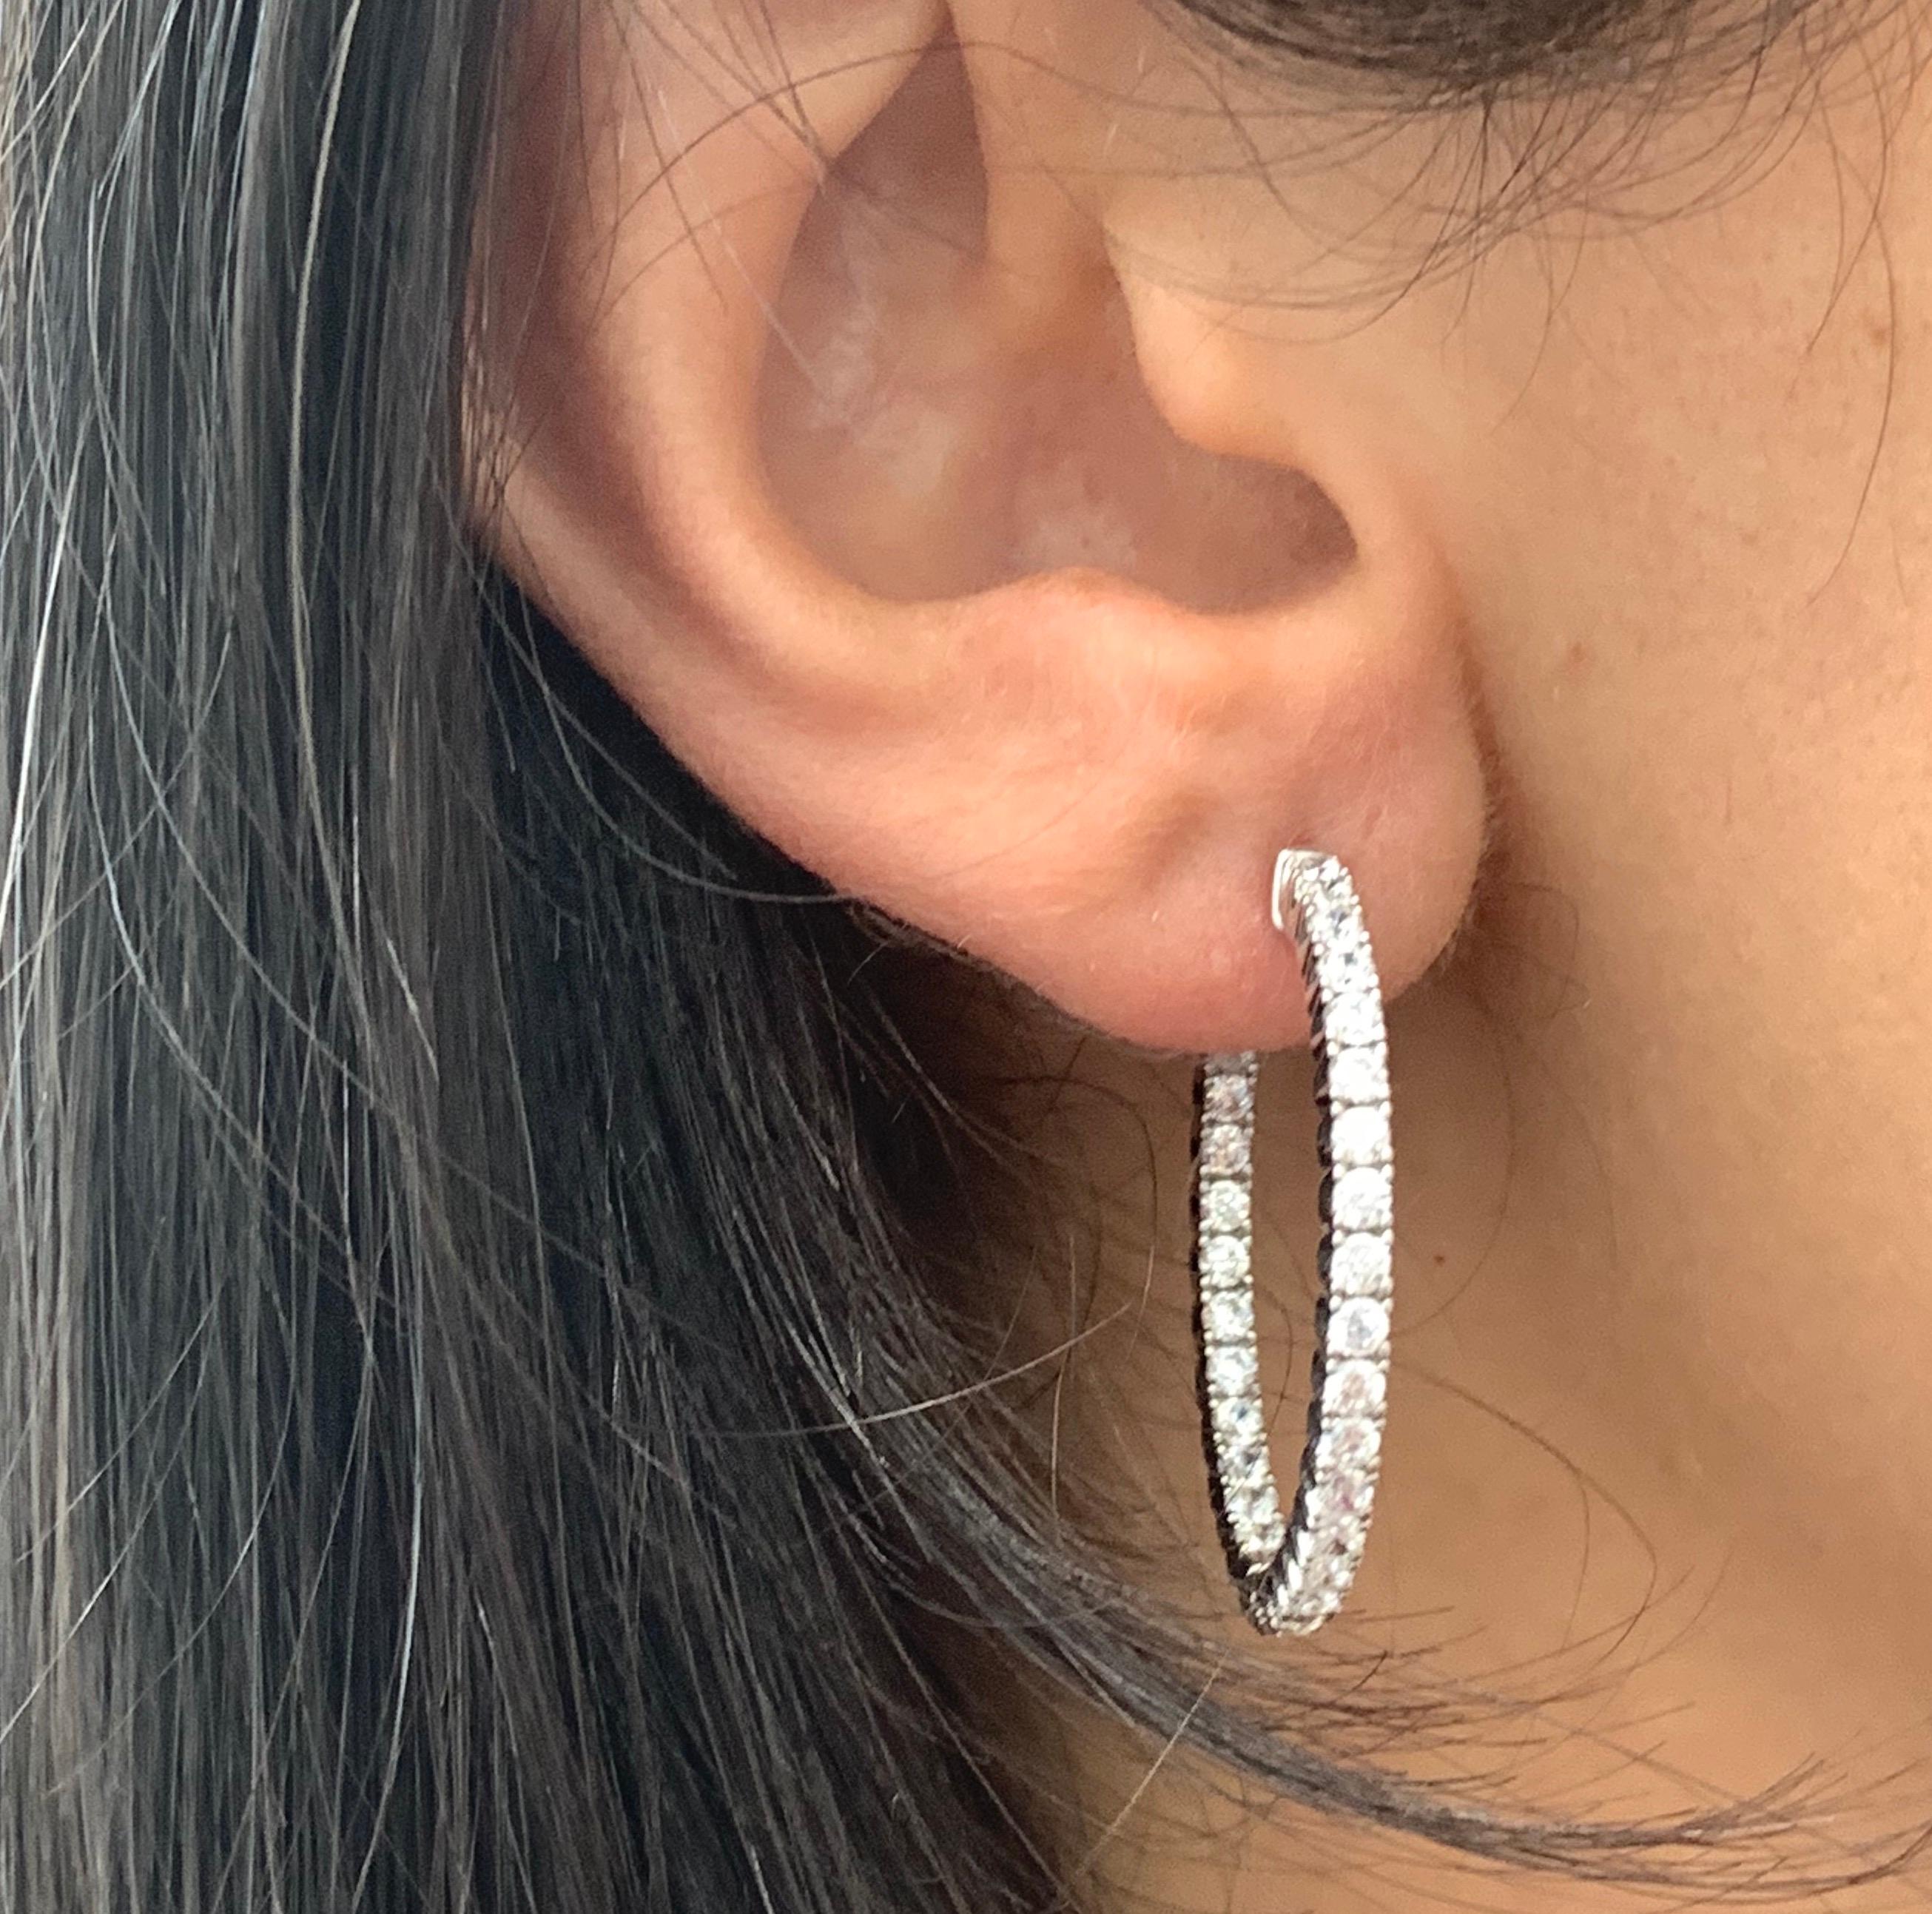 Material: Silver
Earring Length: 1.25 inches

Fine one-of-a-kind craftsmanship meets incredible quality in this breathtaking piece of jewelry.